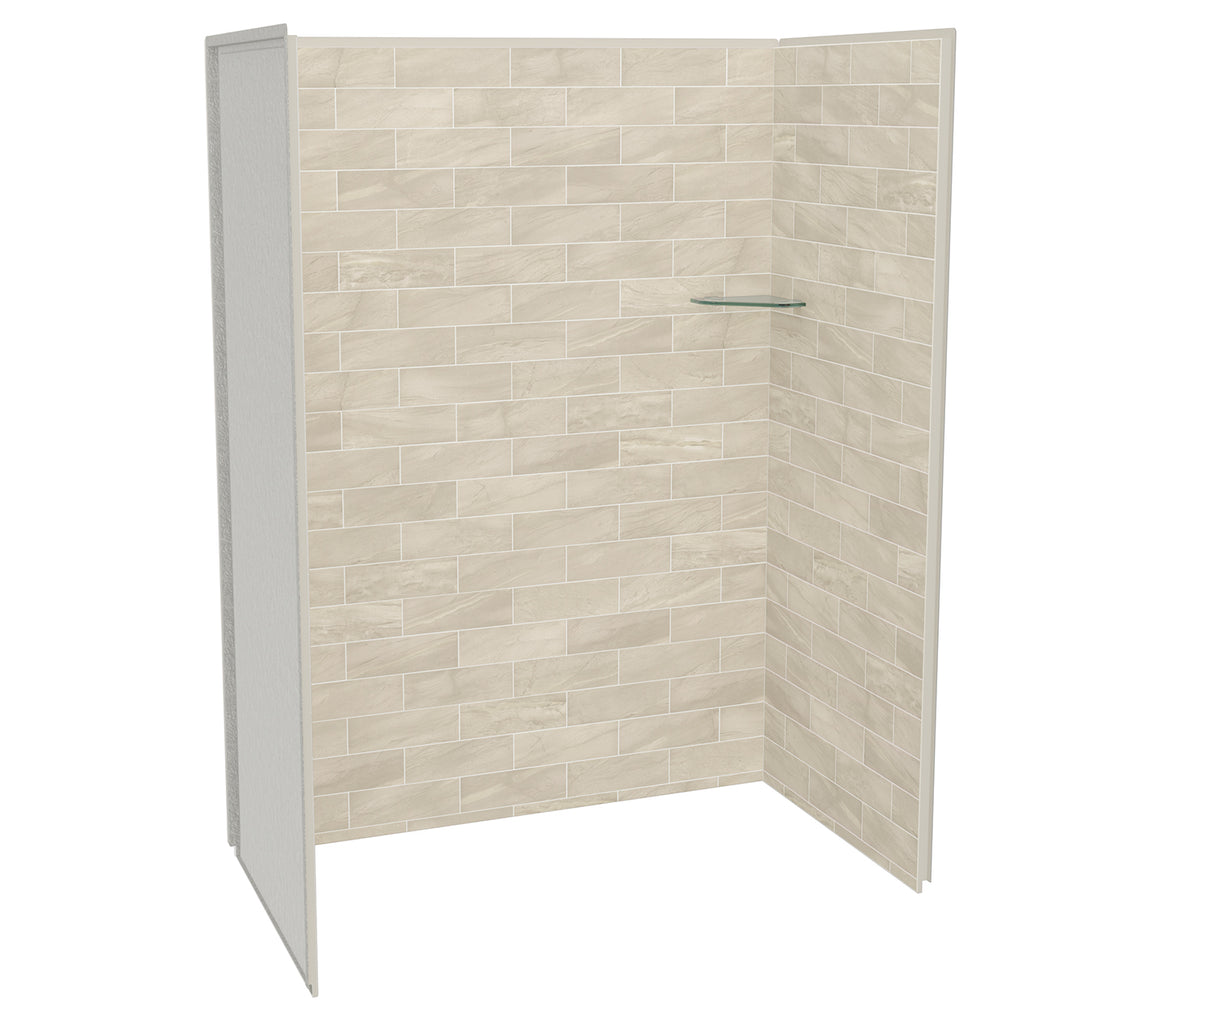 MAAX 107463-312-507 Utile 6032 Composite Direct-to-Stud Three-Piece Alcove Shower Wall Kit in Organik Loam